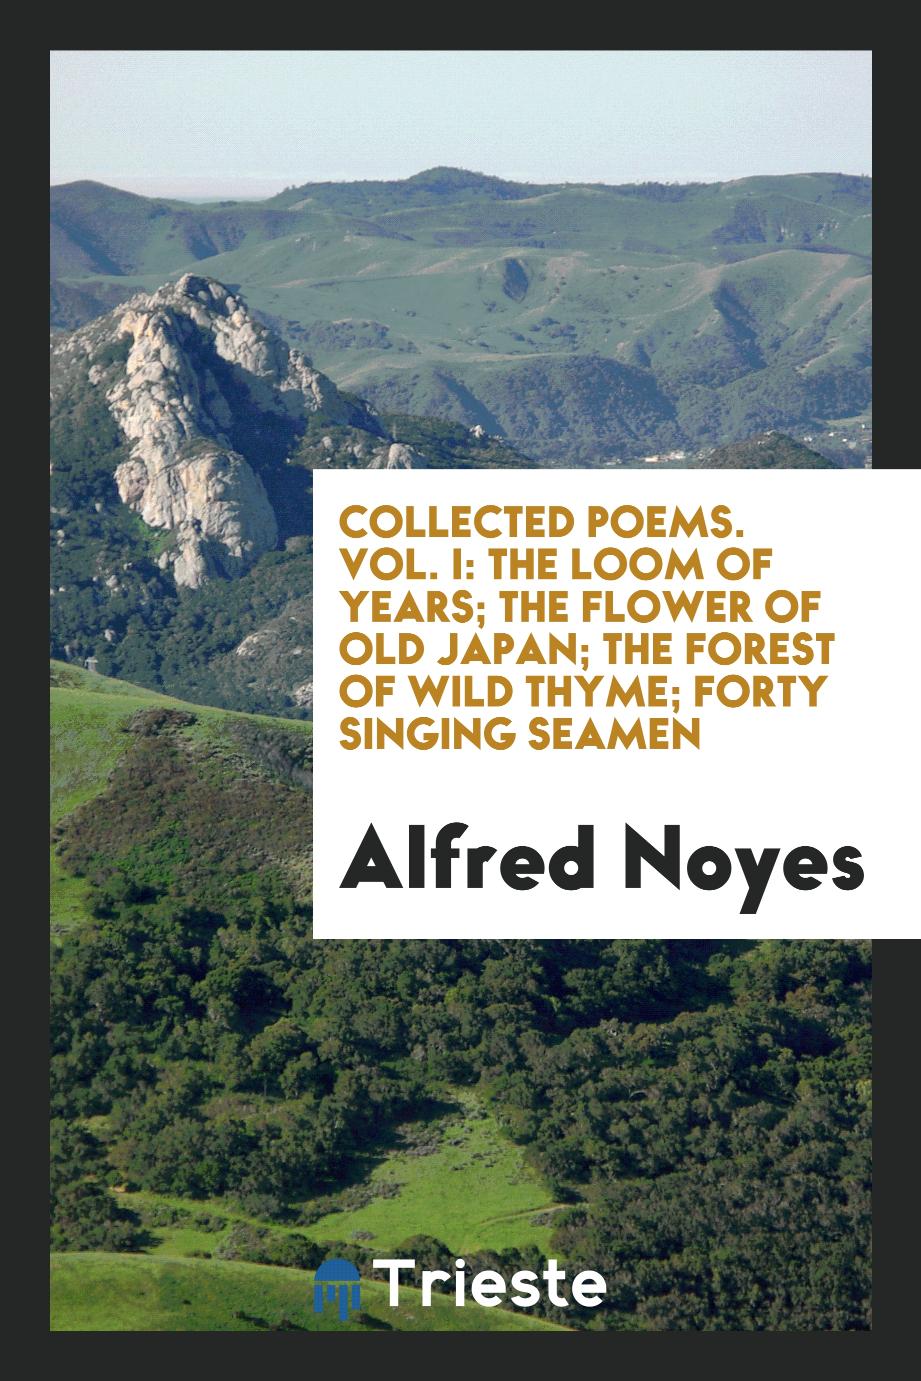 Collected Poems. Vol. I: The Loom of Years; The Flower of Old Japan; The Forest of Wild Thyme; Forty Singing Seamen